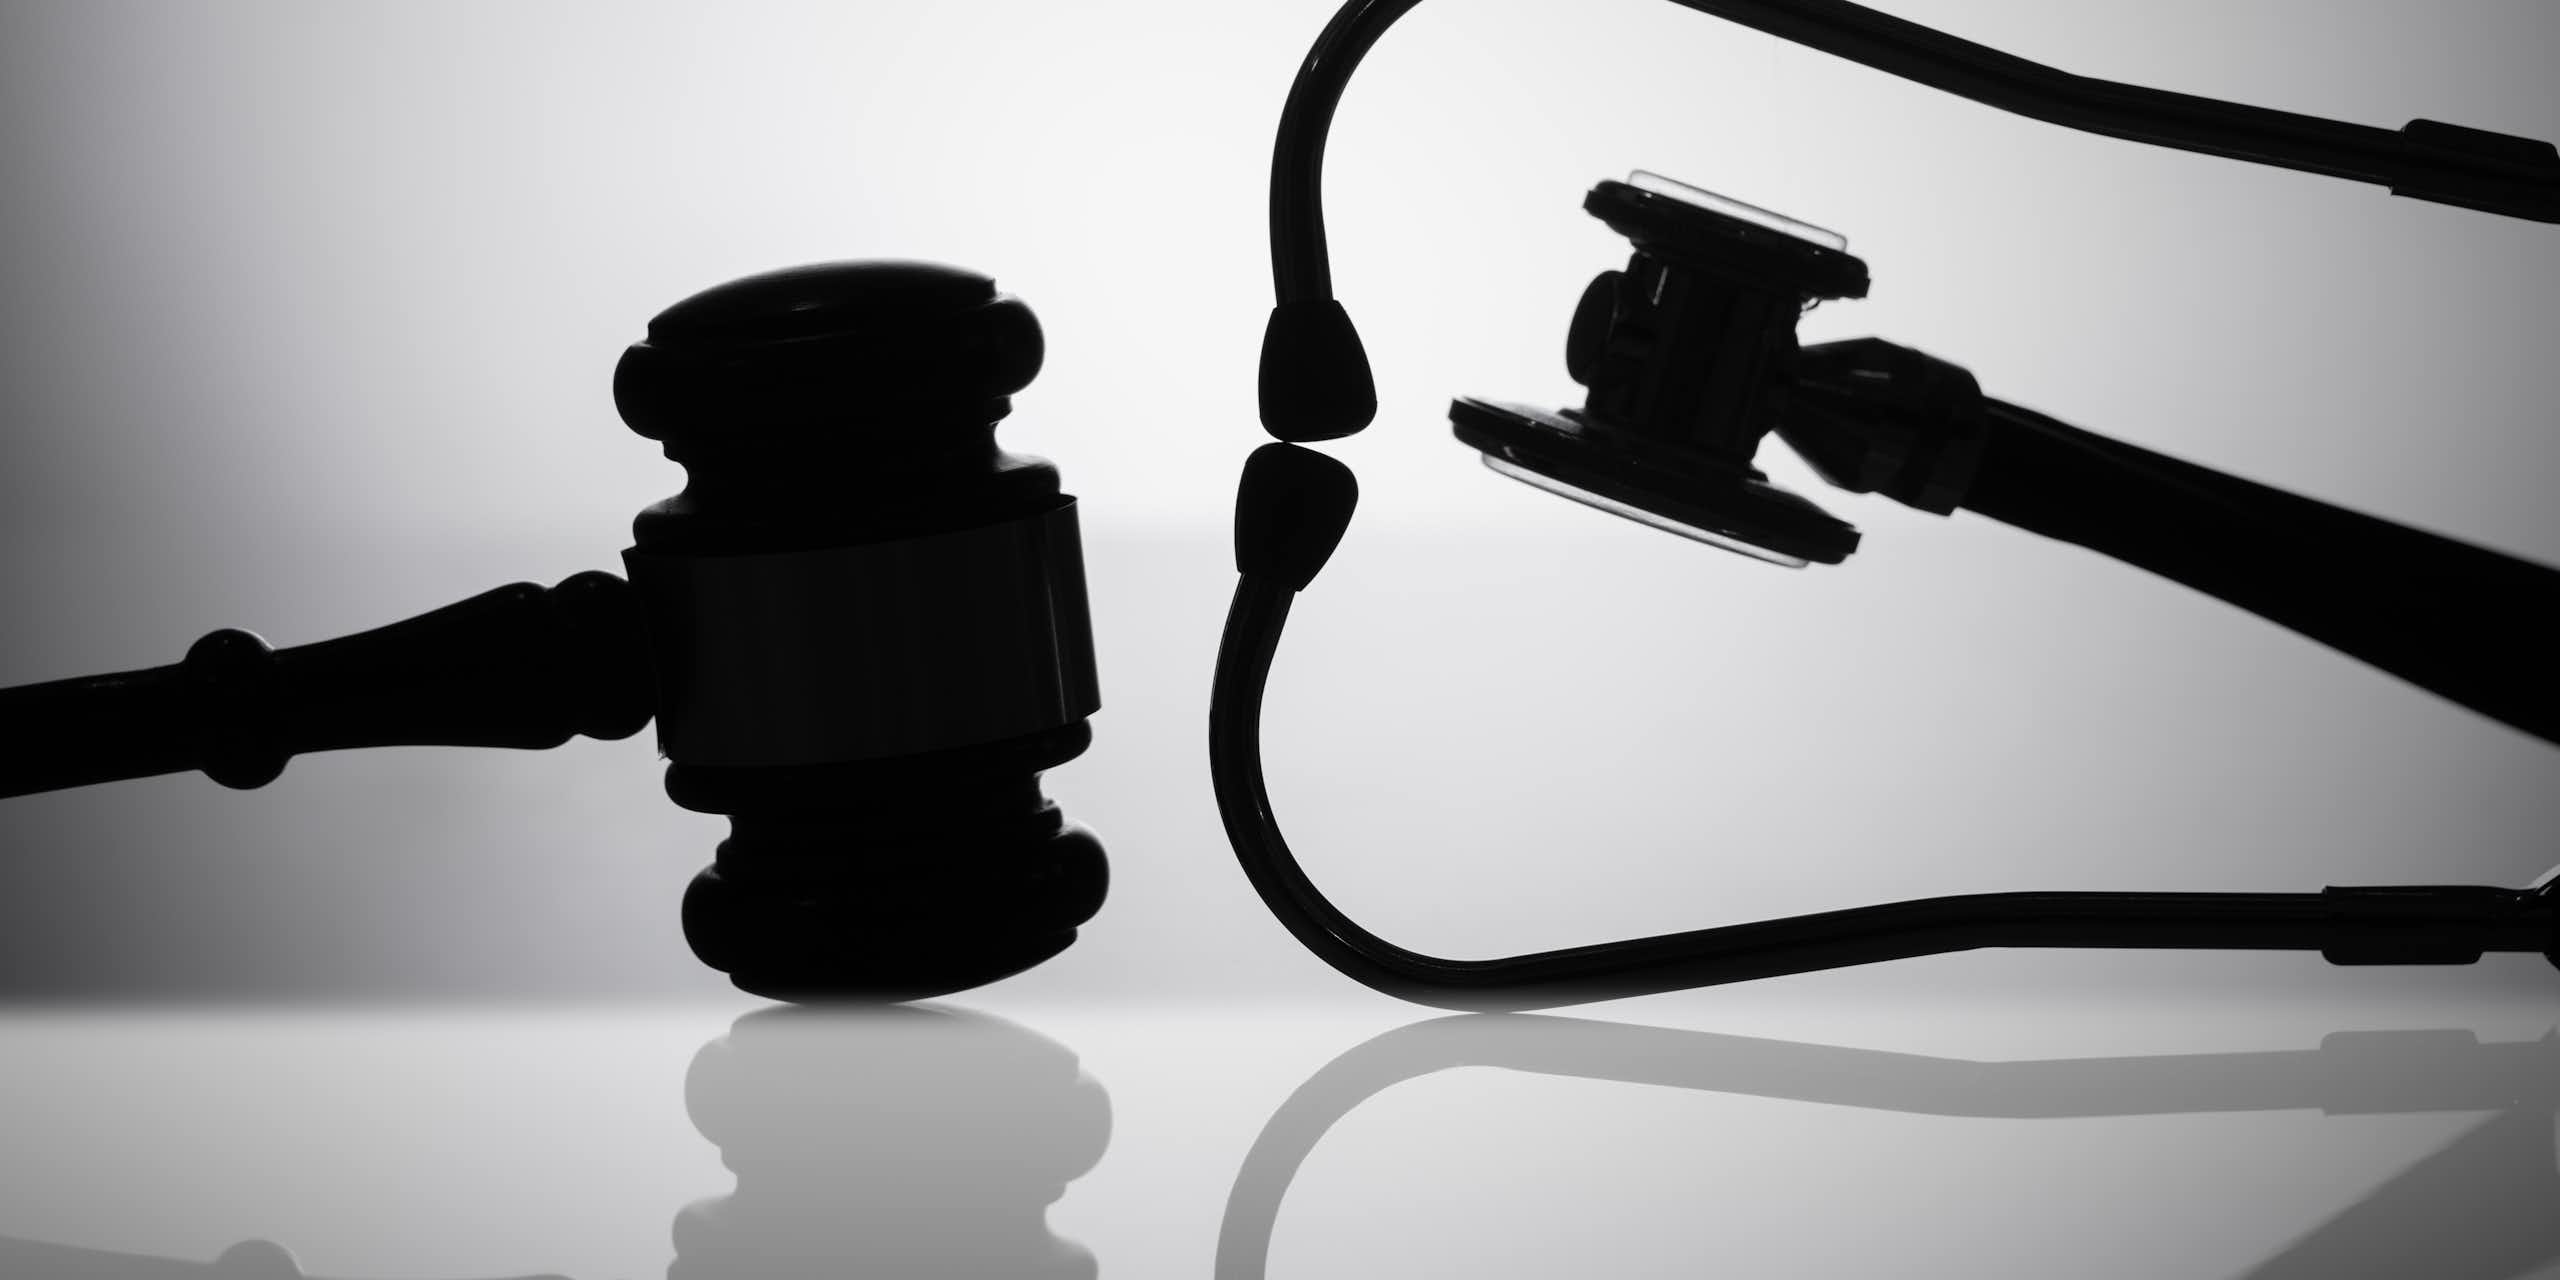 Silhouettes of a judge's gavel and a stethoscope.